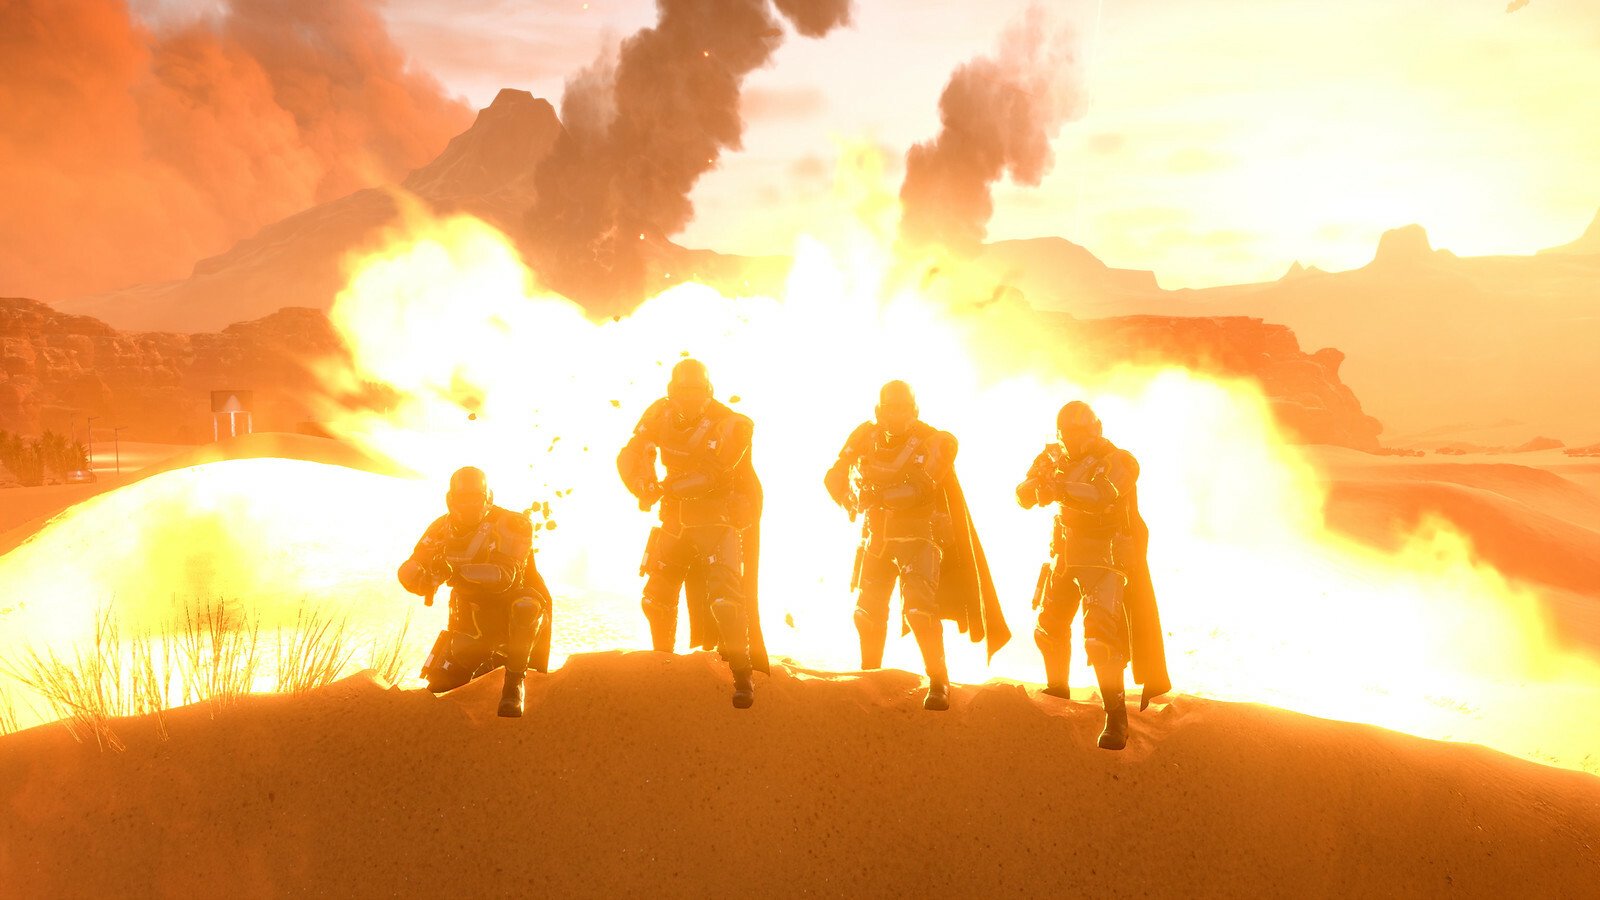 four 3d models of soldiers stand in front of an explosion